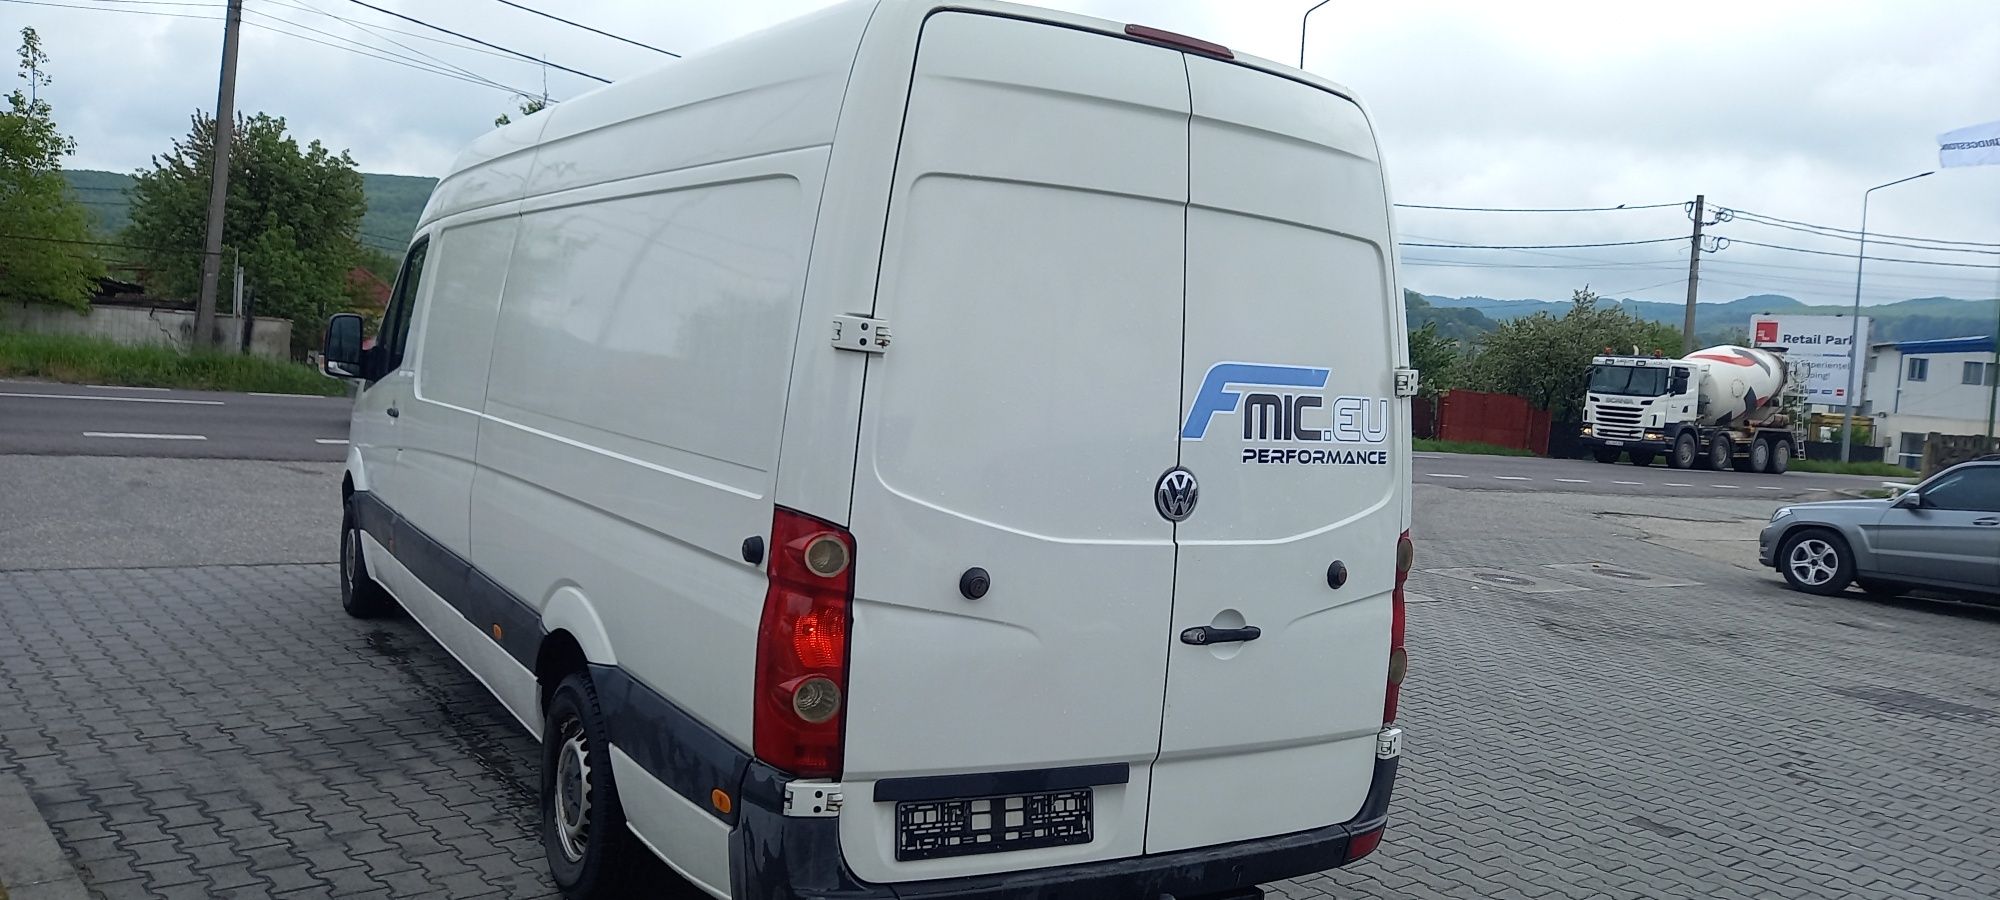 Volkswagen Crafter 2.5Tdi Euro 5 adus recent extra lung